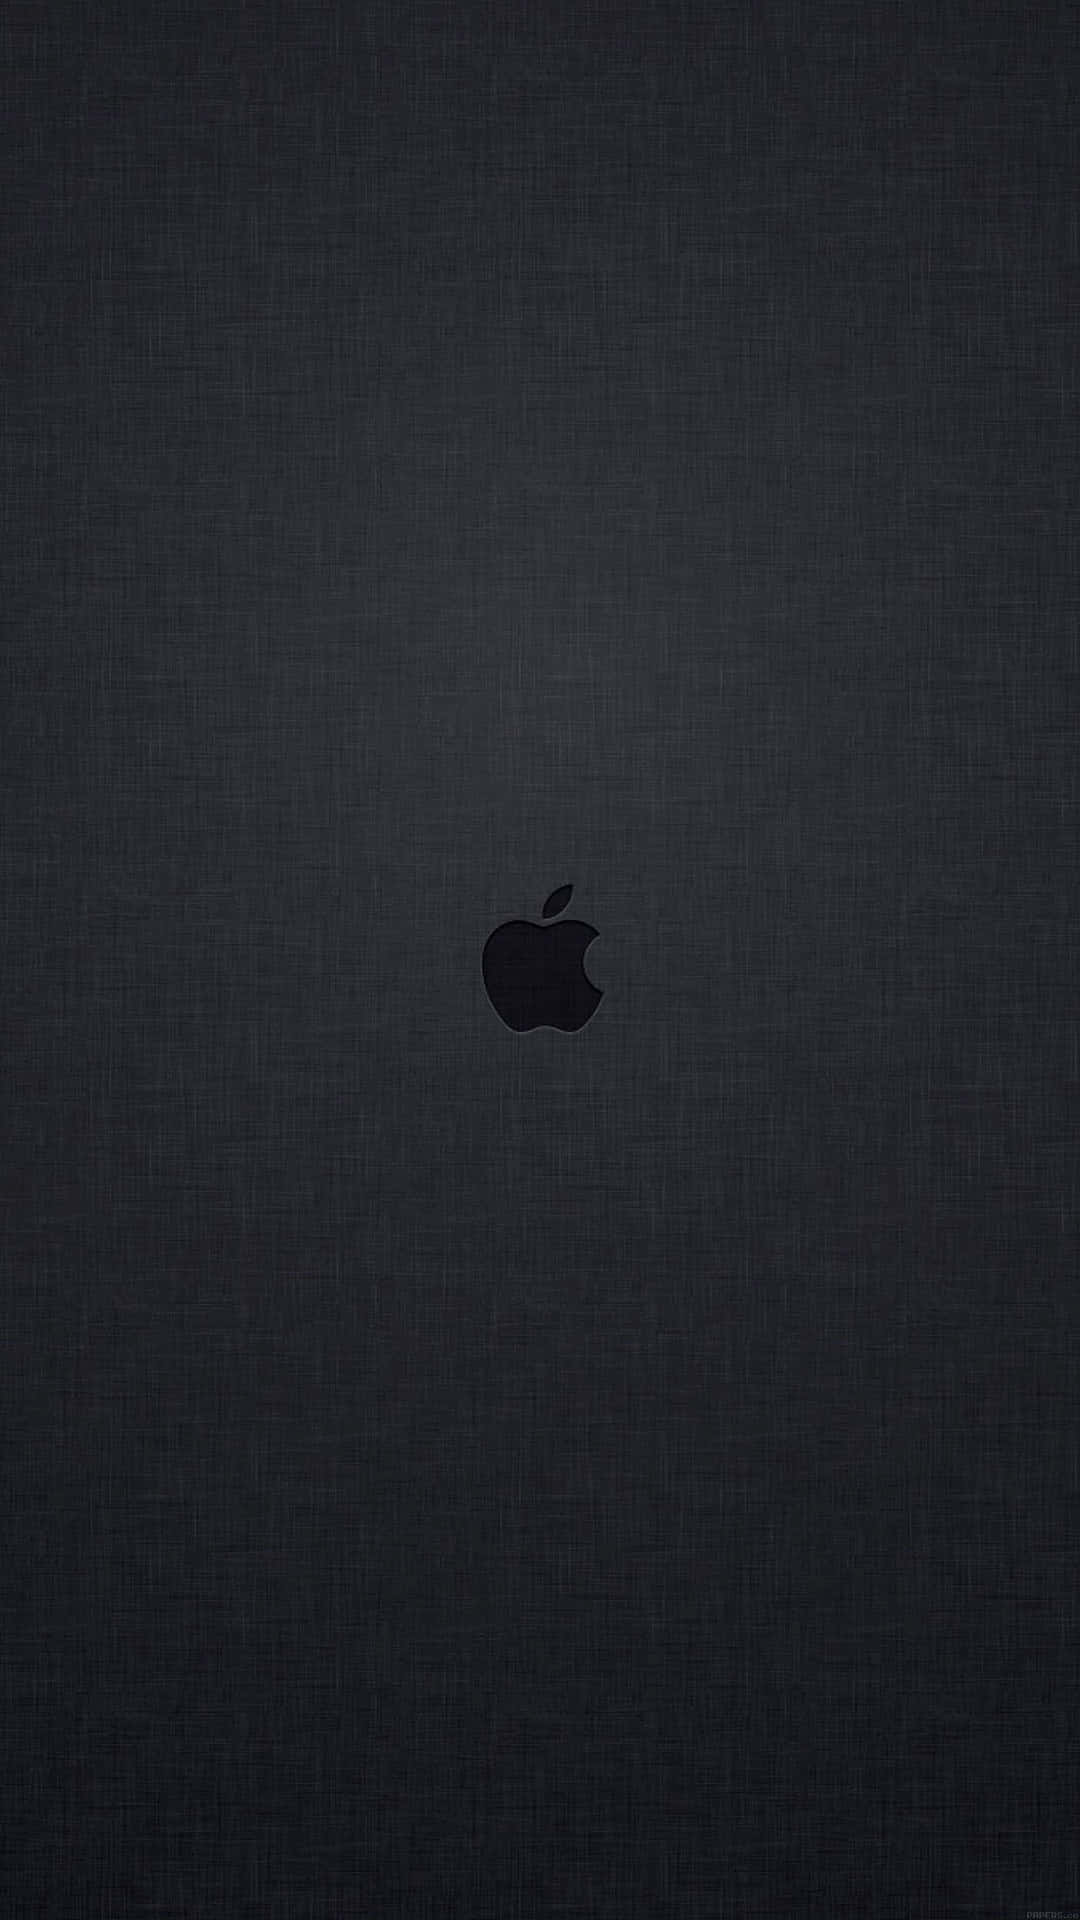 Remarkable Iphone X Apple Background